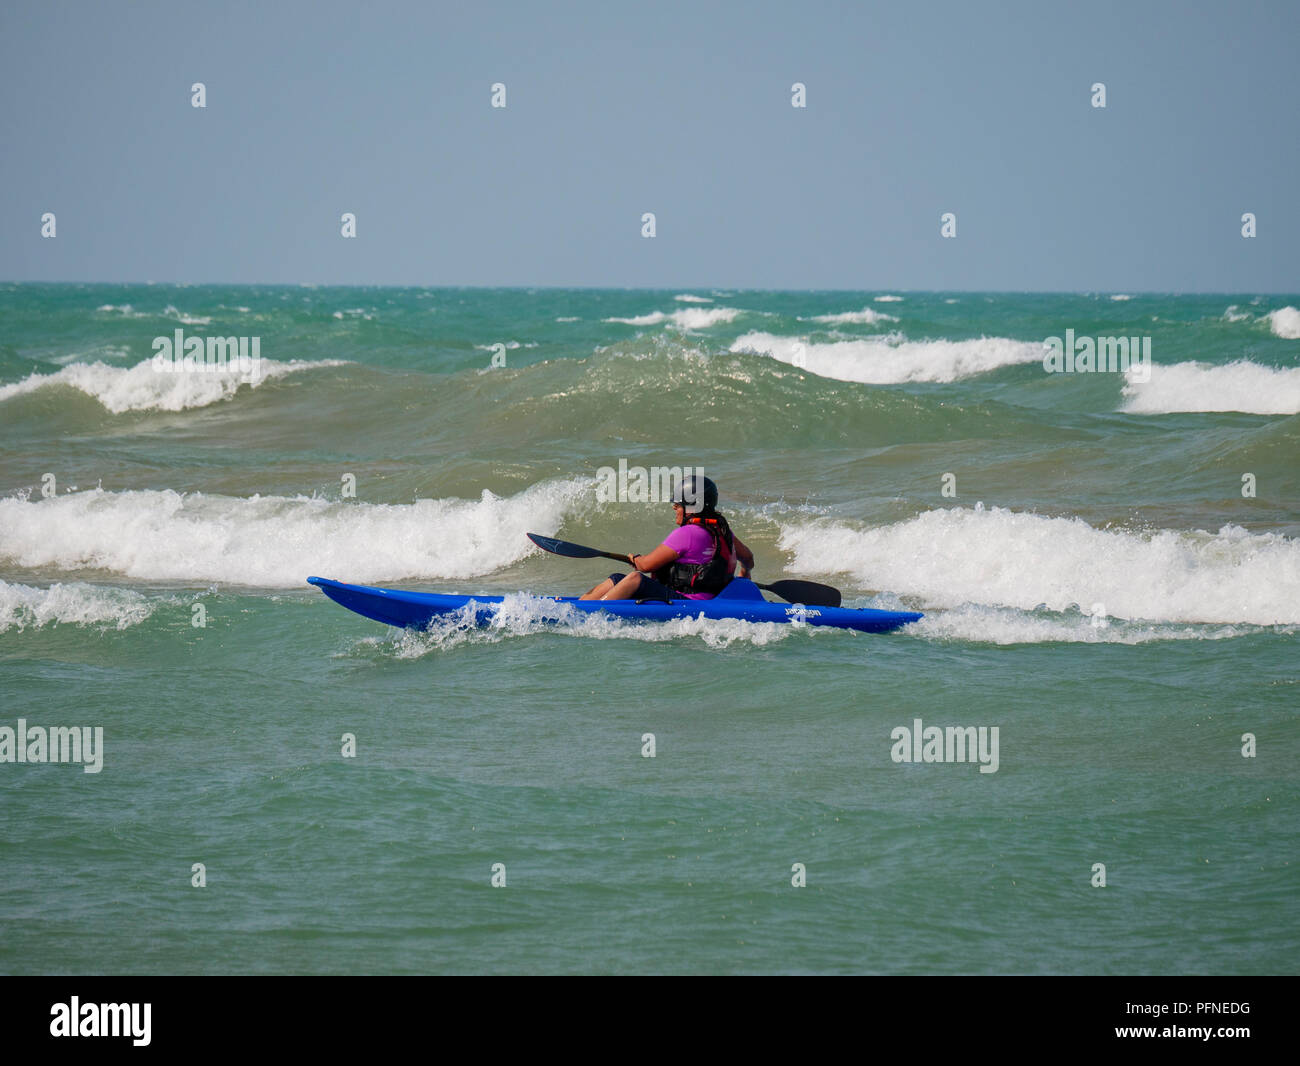 Chicago, Illinois, USA. 21st August 2018. A kayaker braves the surf at Montrose Beach. Stiff northeast winds whipped up surf on Lake Michigan, bringing out kayakers, kite surfers and wave watchers. Credit: Todd Bannor/Alamy Live News Stock Photo